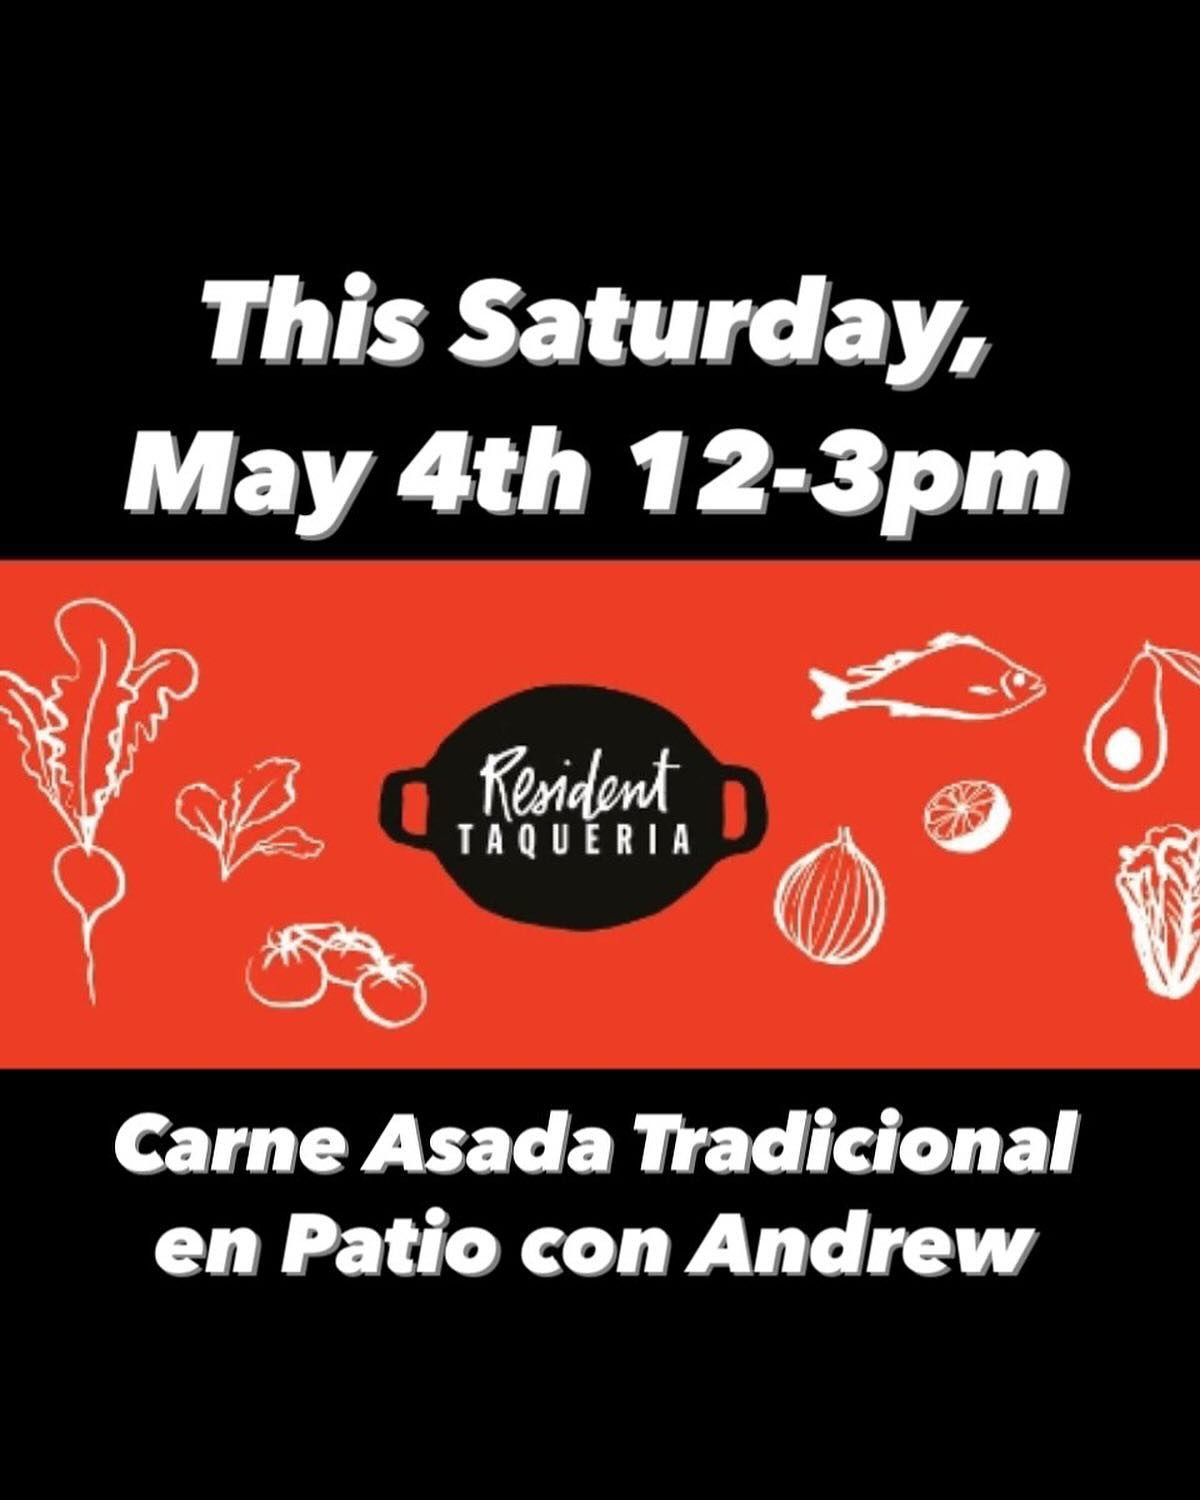 Since Cinco de Mayo is on a Sunday this year and we will be closed, come celebrate early with us on May 5th from 12-3pm. I will be grilling traditional Carne Asada tacos!  Bring a chair and pull up a seat and drink with your neighbors!  SALUD!